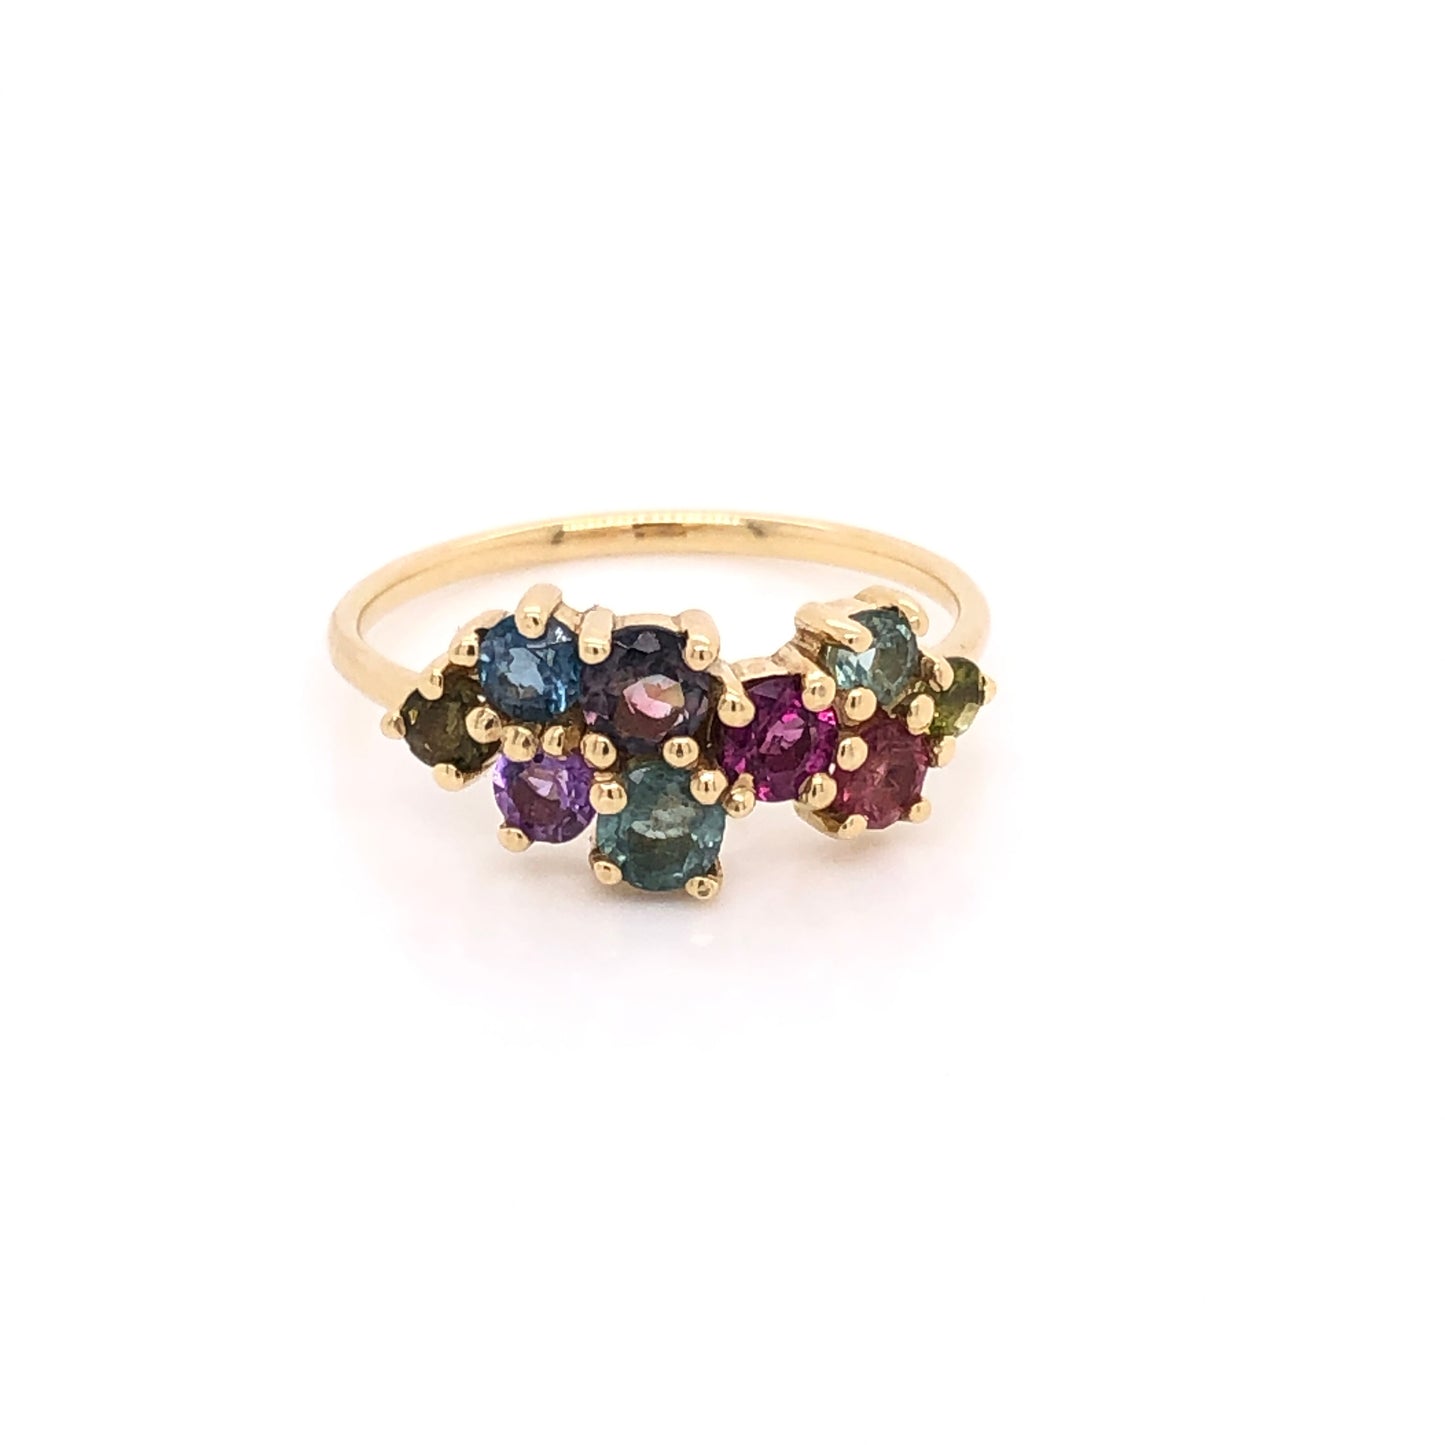 "Cluster" Ring of Colored Stones